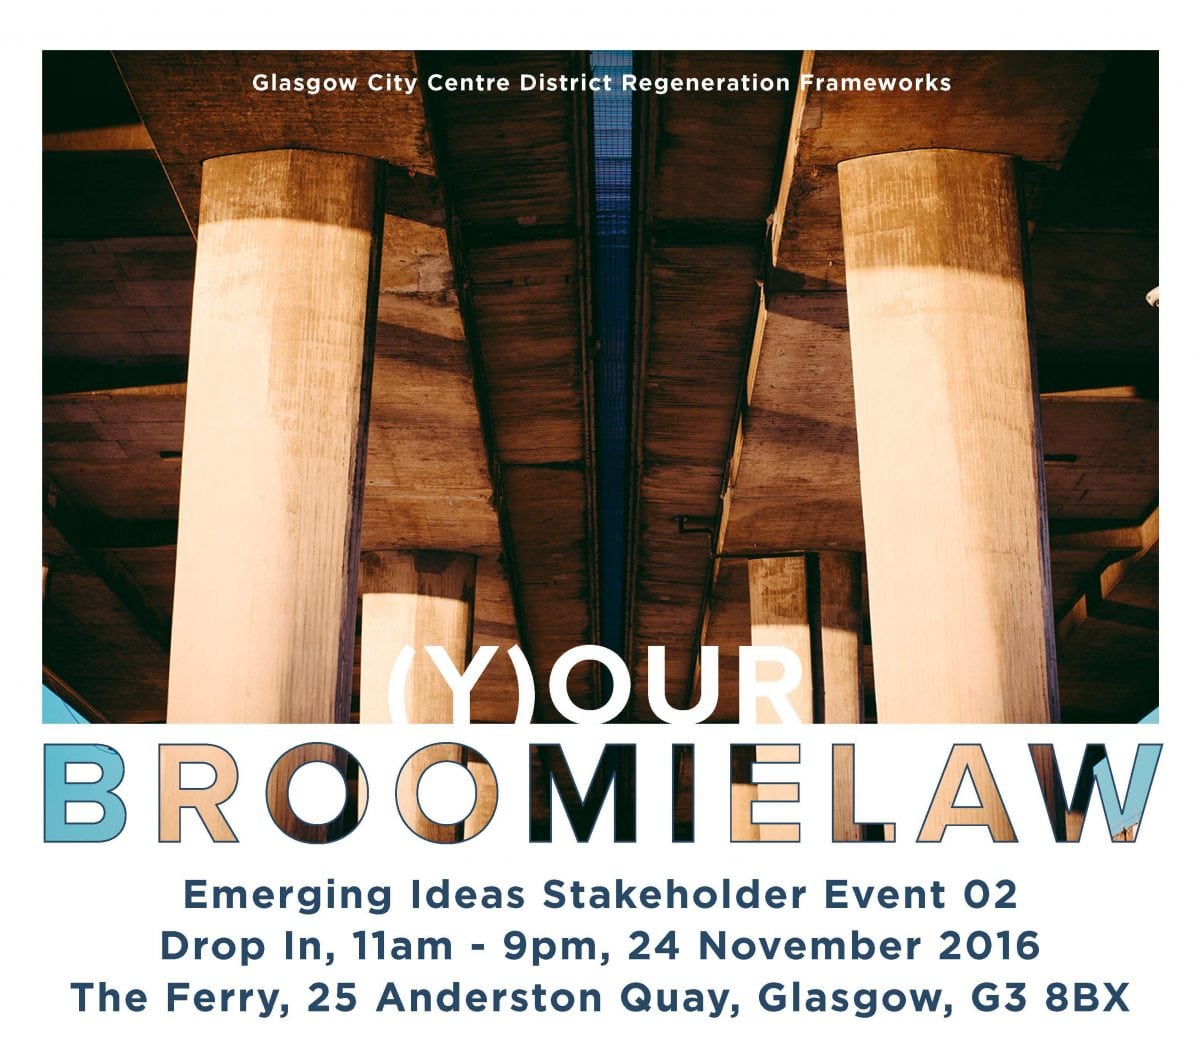 Diary Date: 24th November 2016 – (Y)our Broomielaw Stakeholder Event